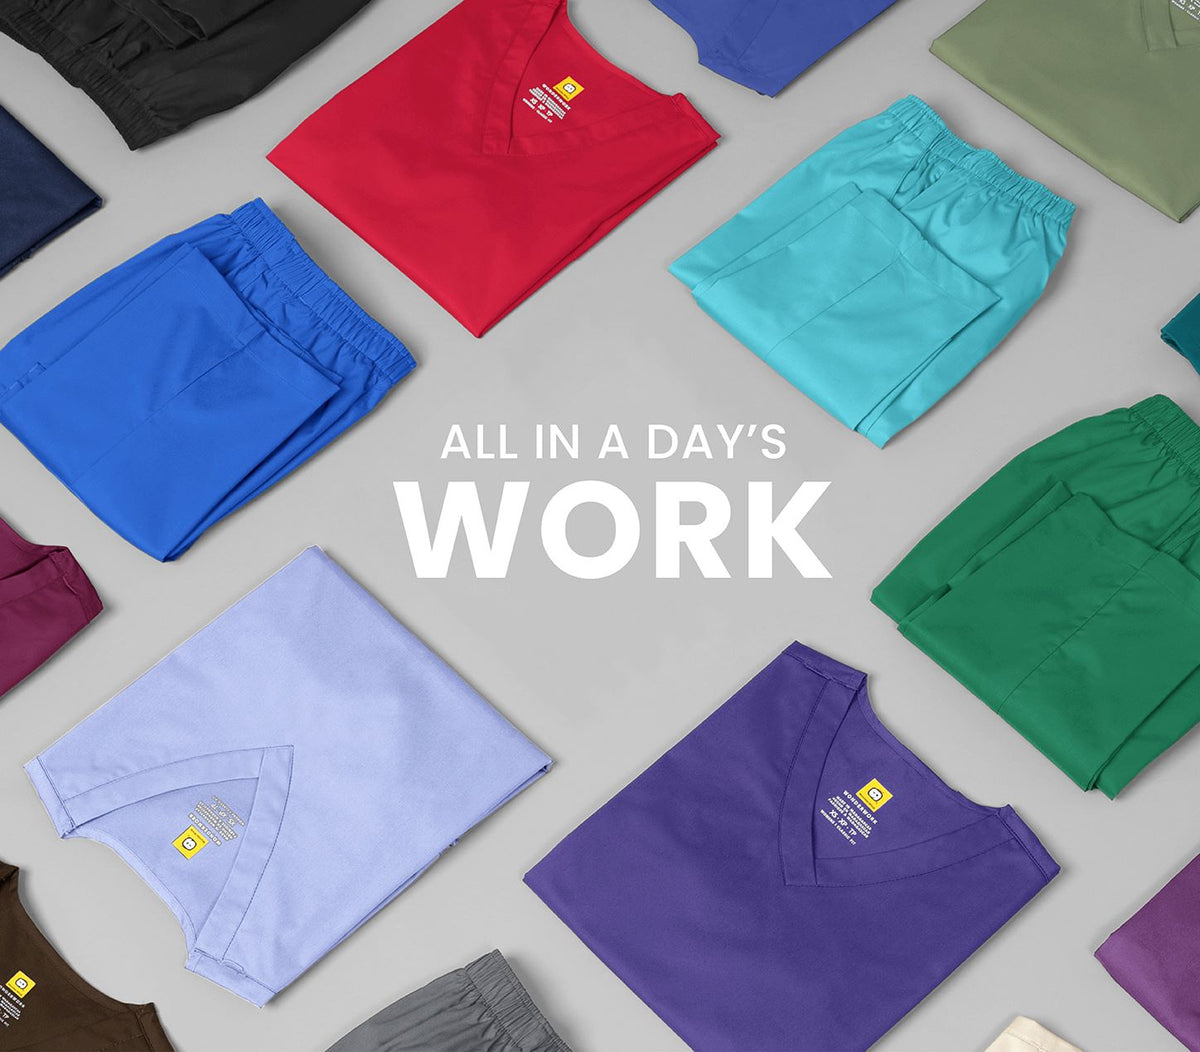 "All in a day's work" Variety of folded scrub tops and scrub pants